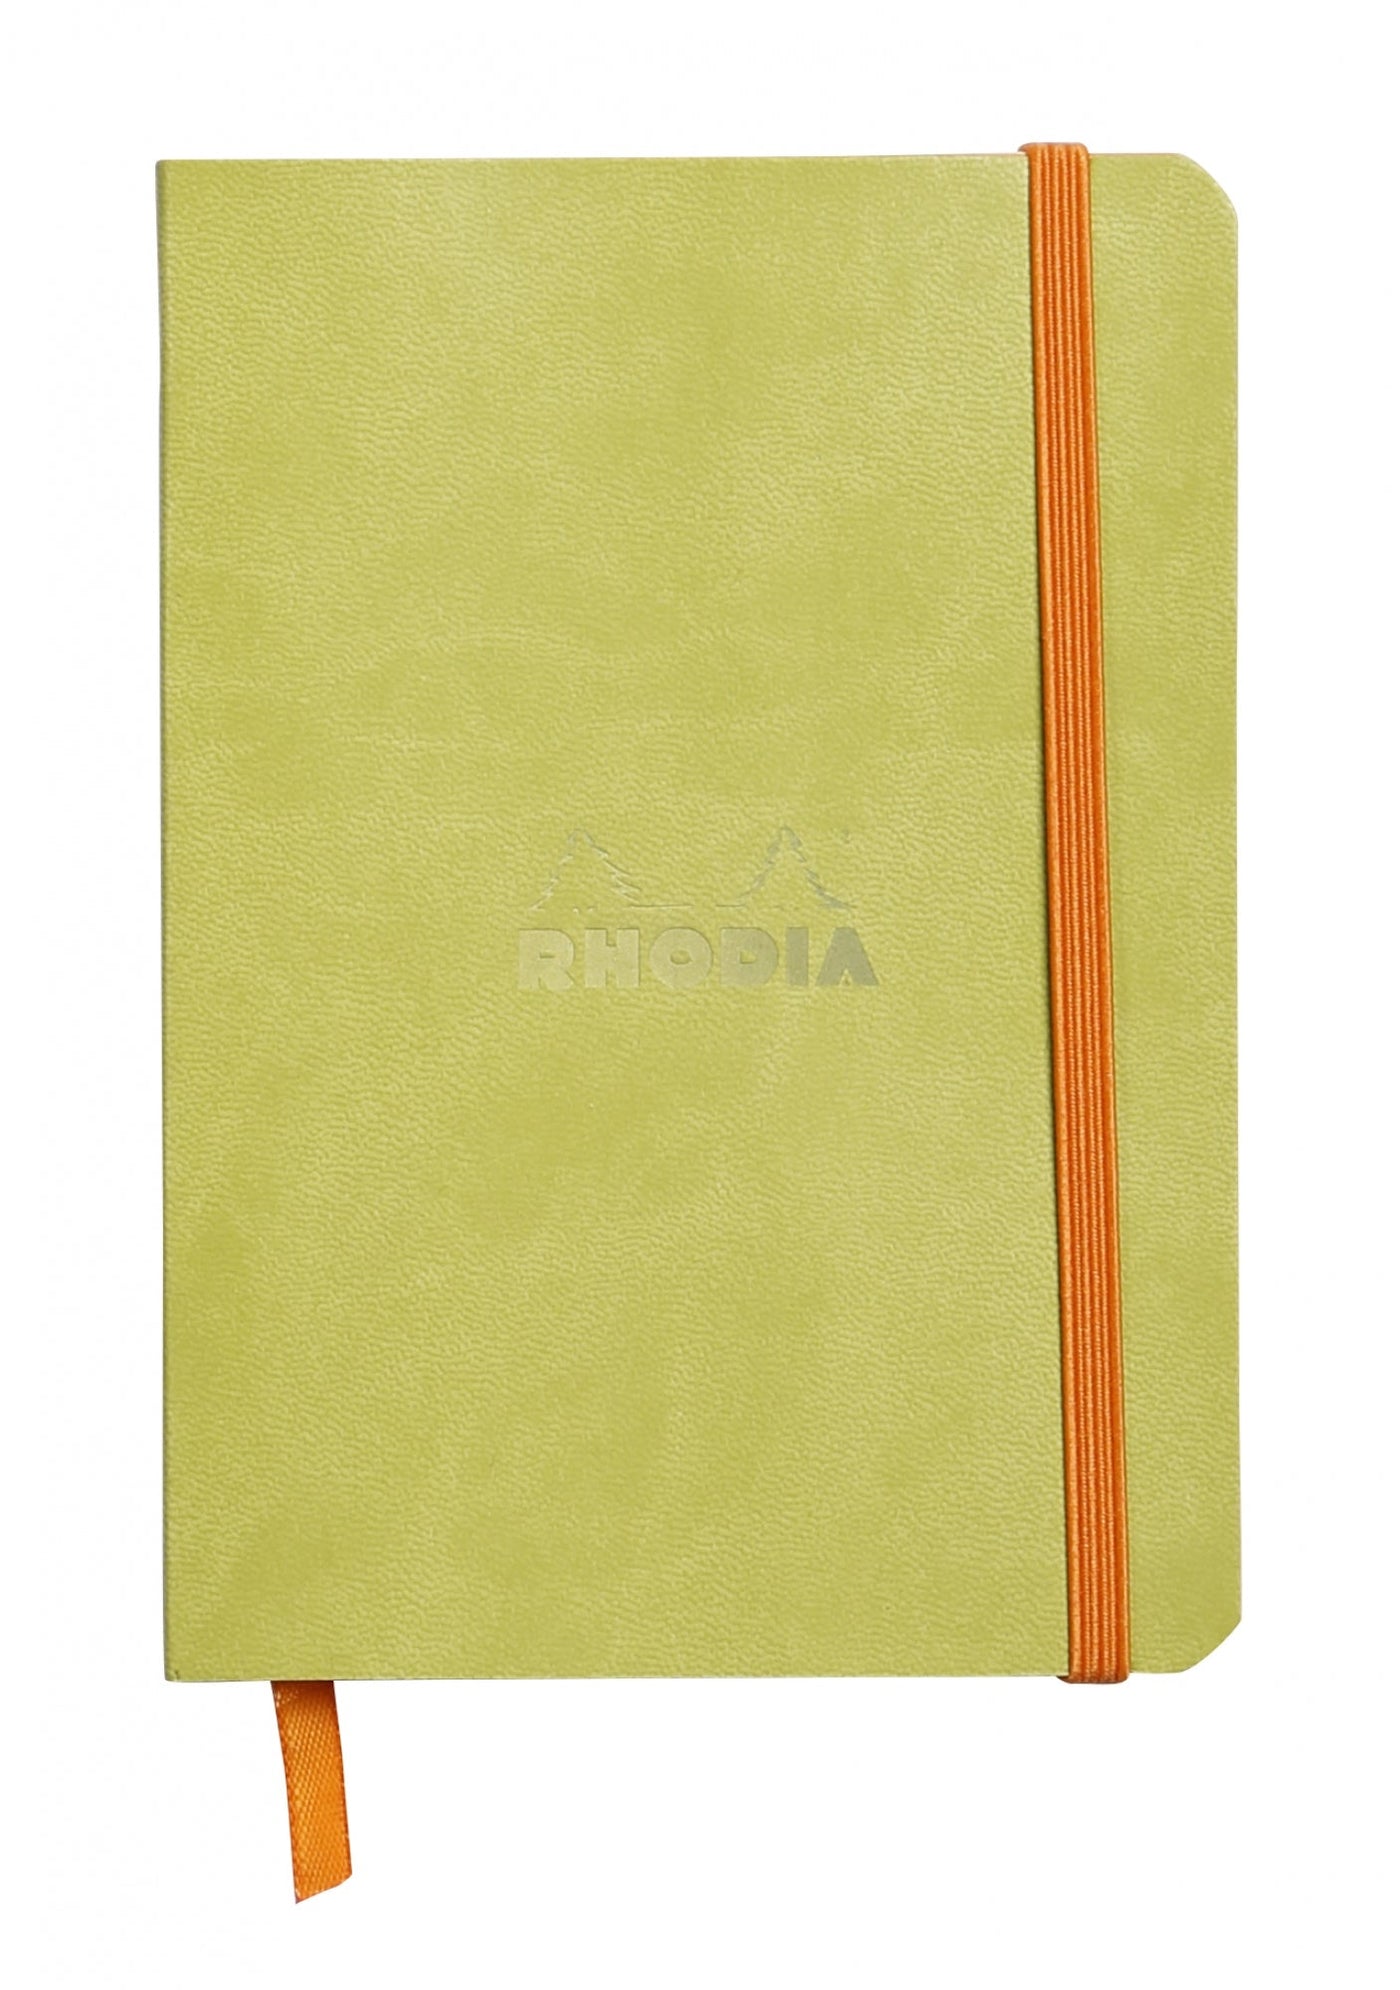 Rhodia Rhodiarama Soft Cover A6 Anise Lined Notebook